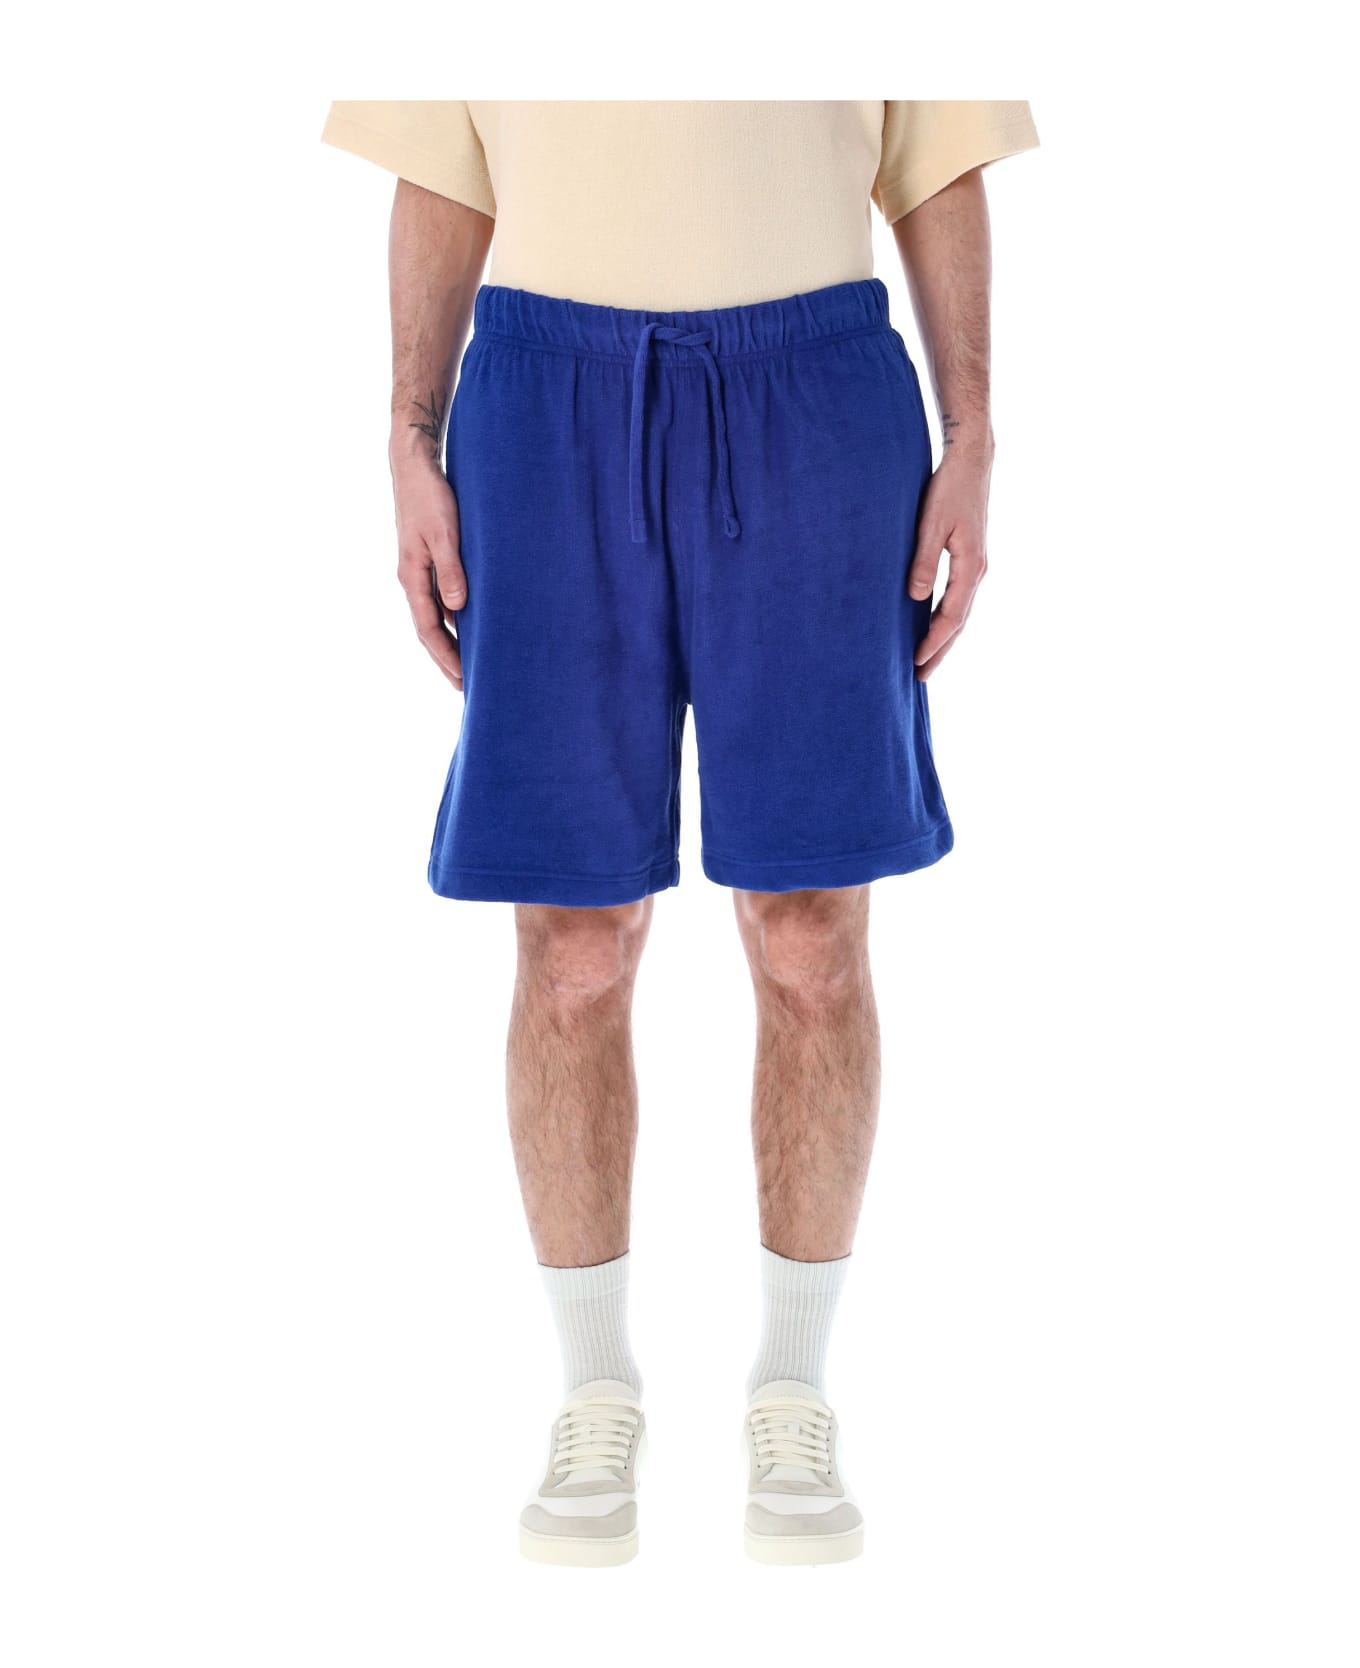 Burberry London Towelling Shorts - KNIGHT